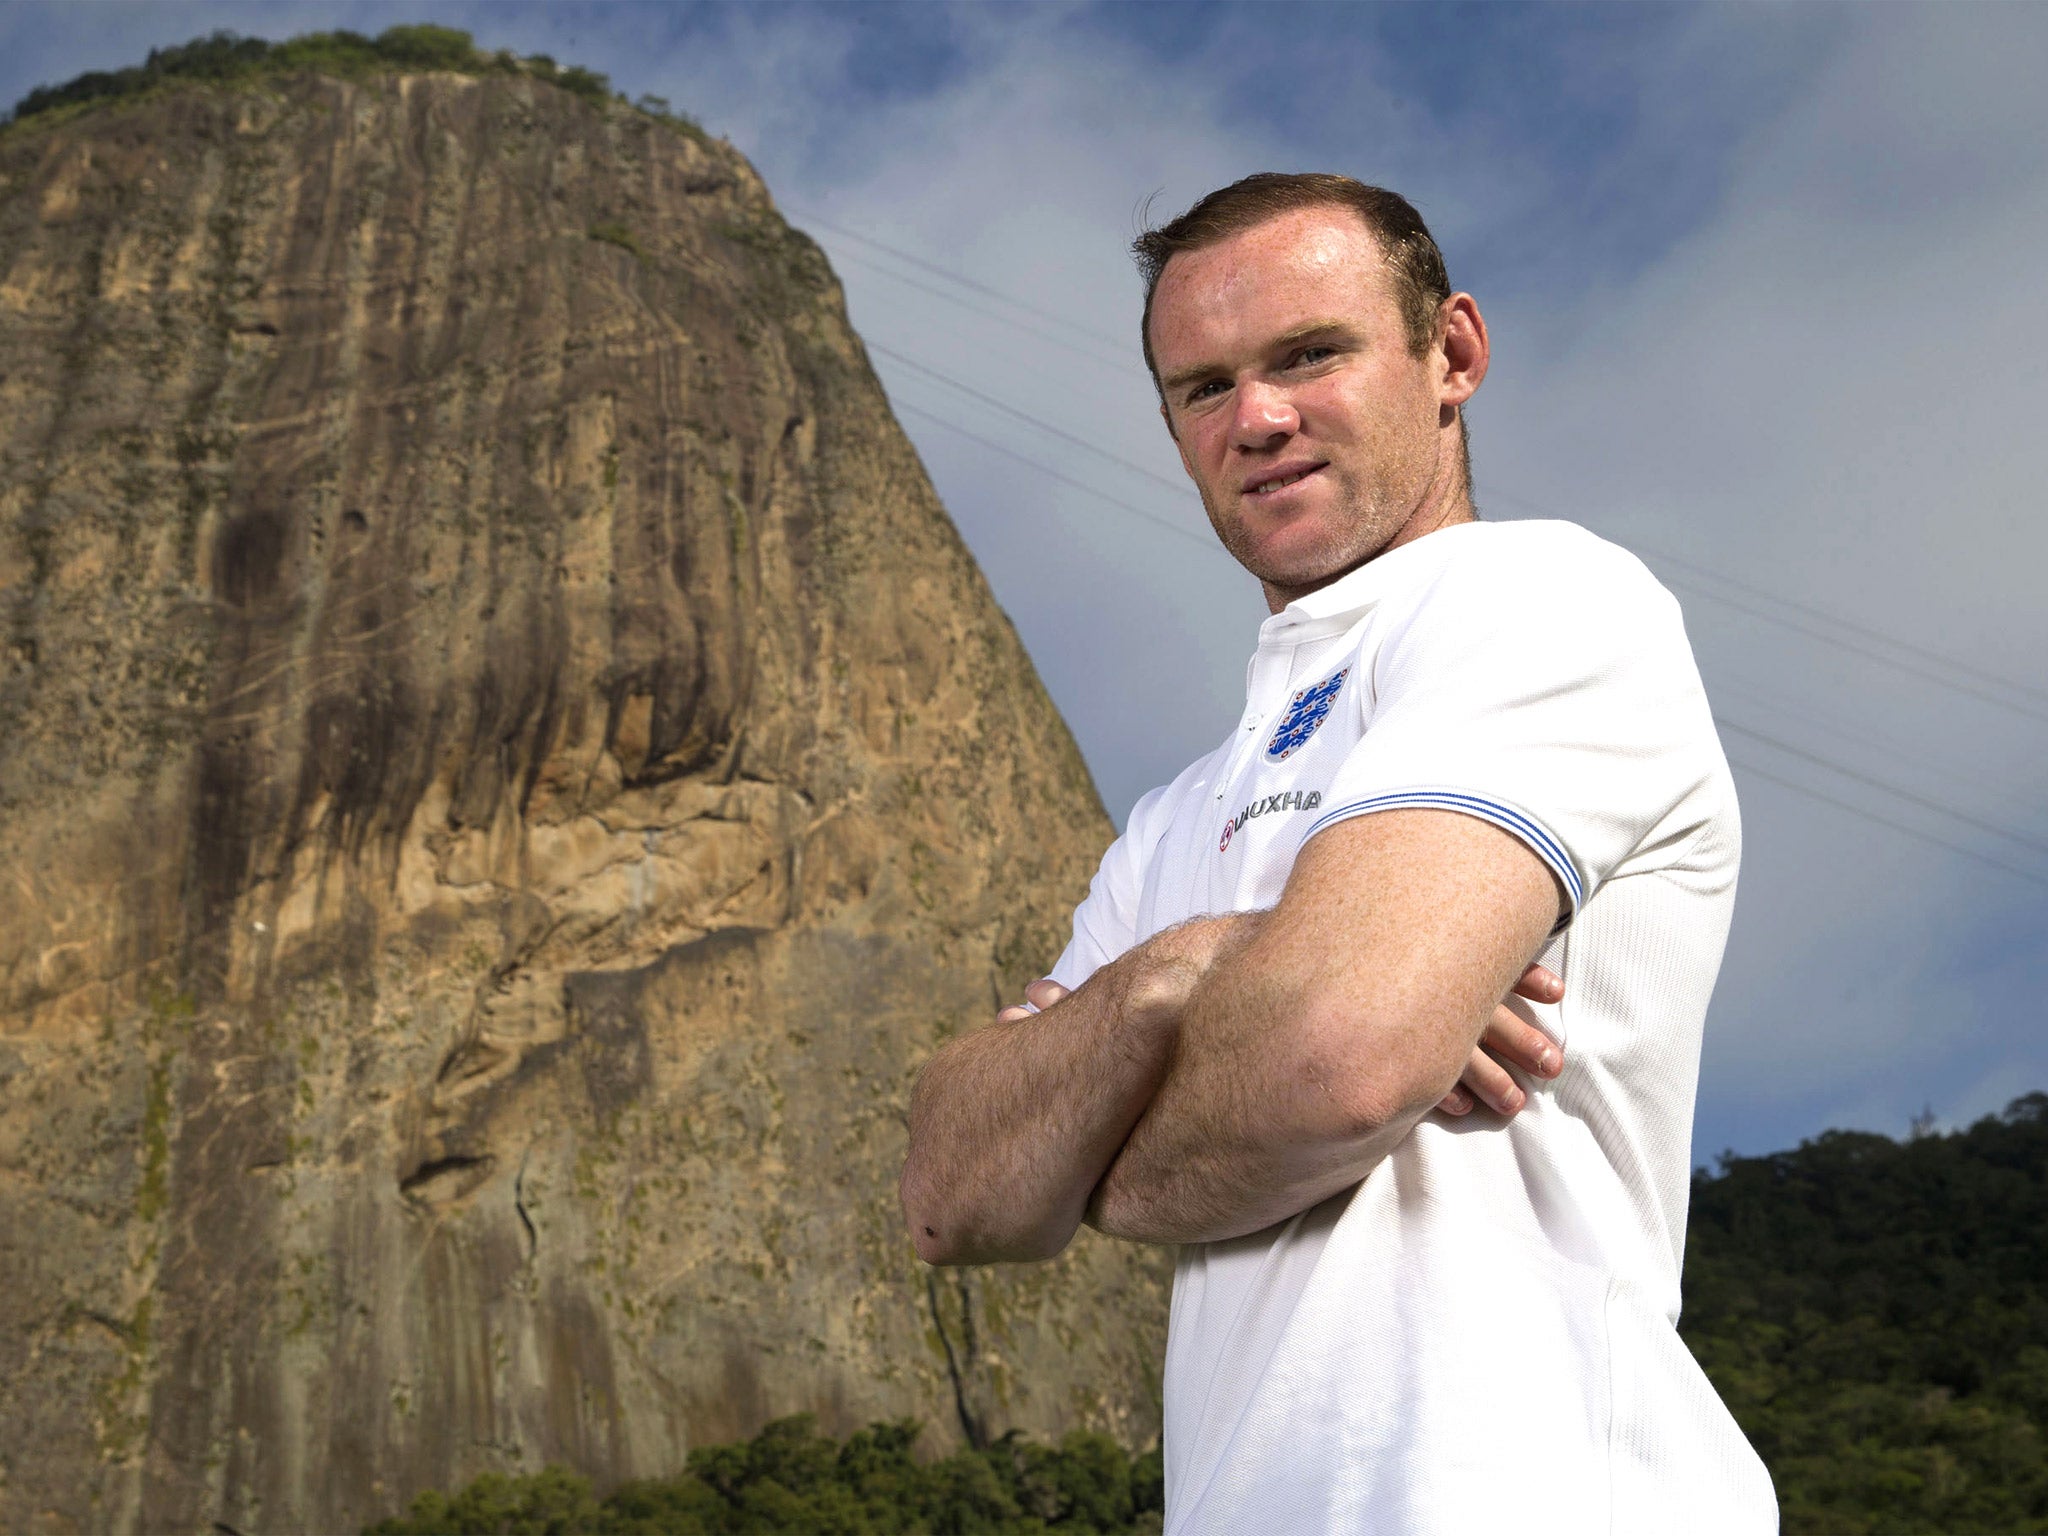 Wayne Rooney admitted that he was unhappy at the last World Cup but said he will enjoy this one